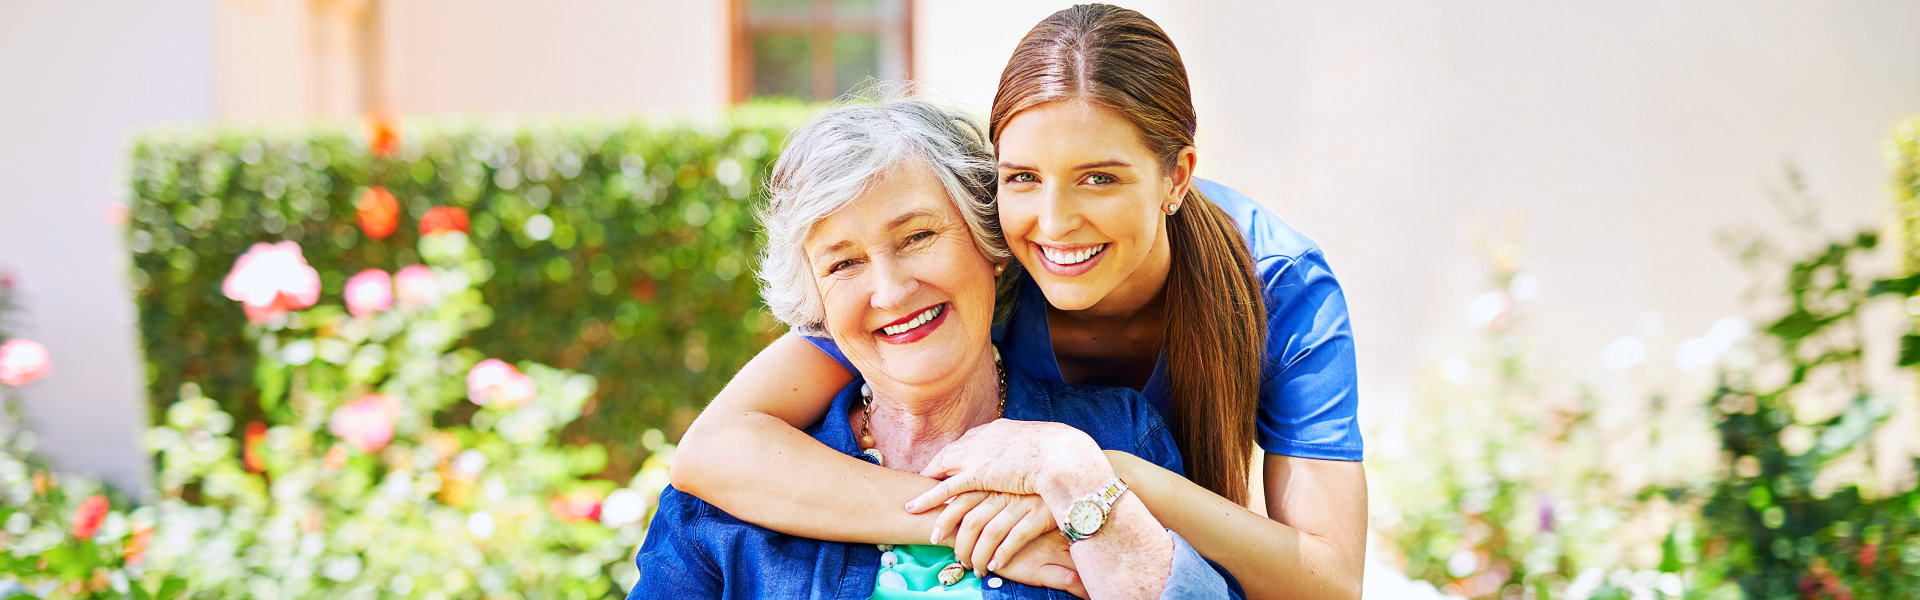 aide and elderly woman smiling